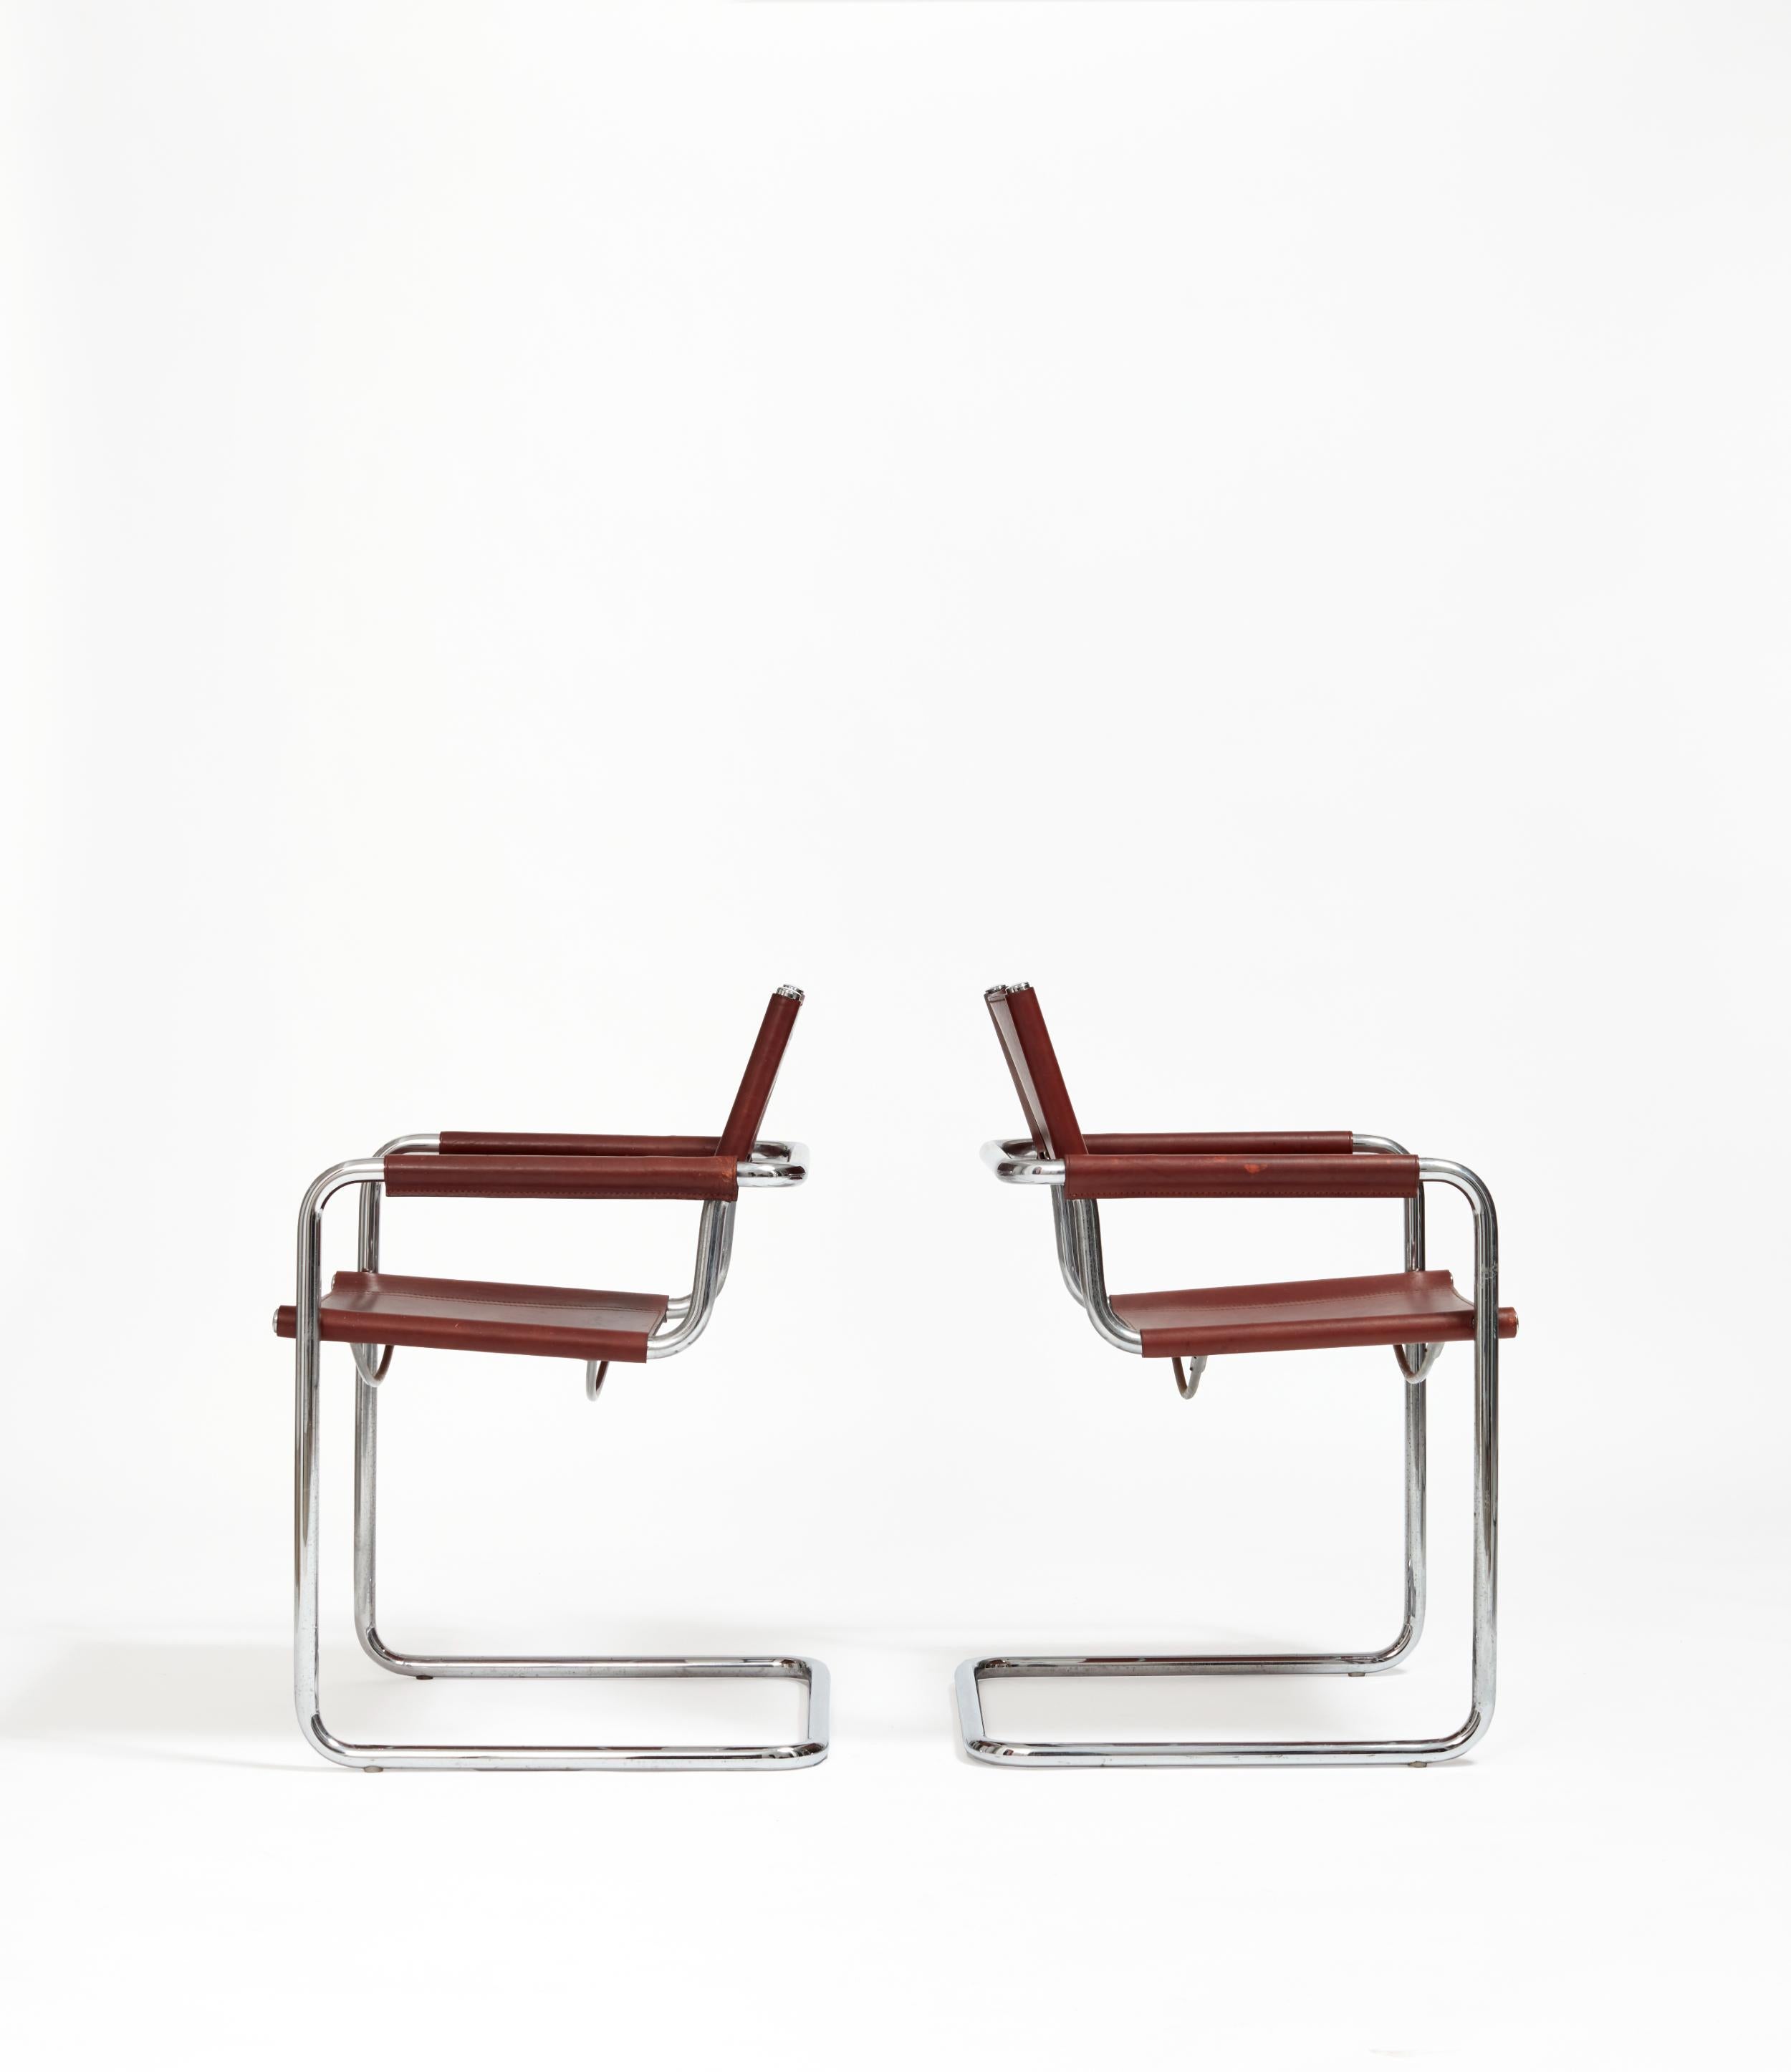 In 1935 Marcel Breuer, like other Bauhaus architects Walter Gropius and Ludwig Mies van der Rohe, left for the United States. Marcel Breuer's large library of tubular steel furniture pieces, ranging from seating to occasional furnishings, have since